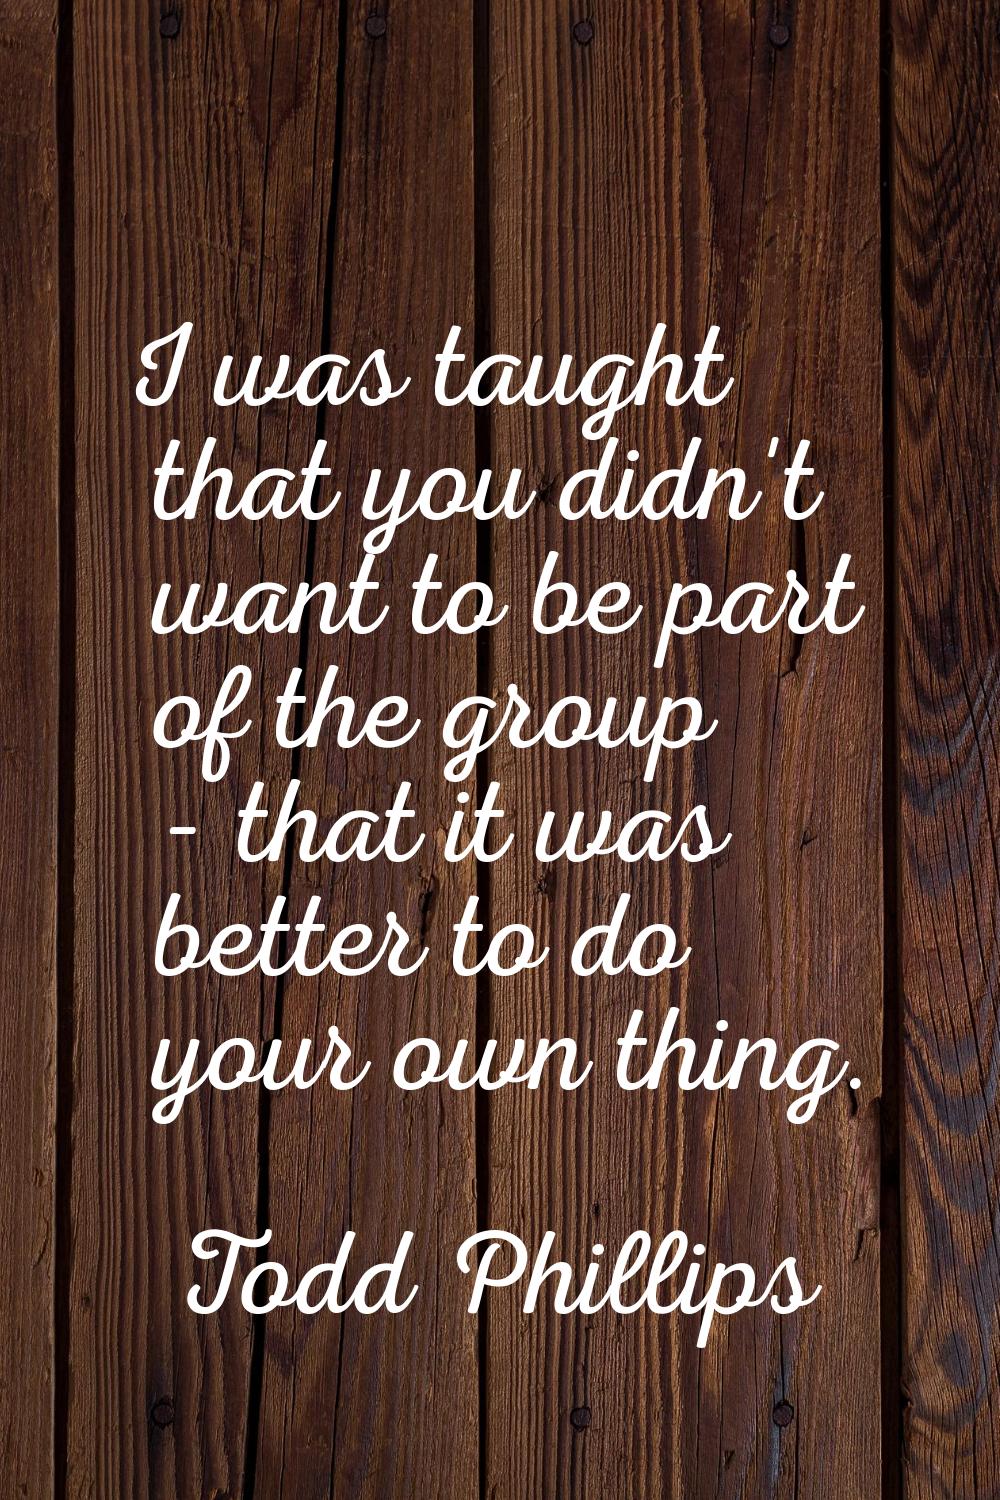 I was taught that you didn't want to be part of the group - that it was better to do your own thing